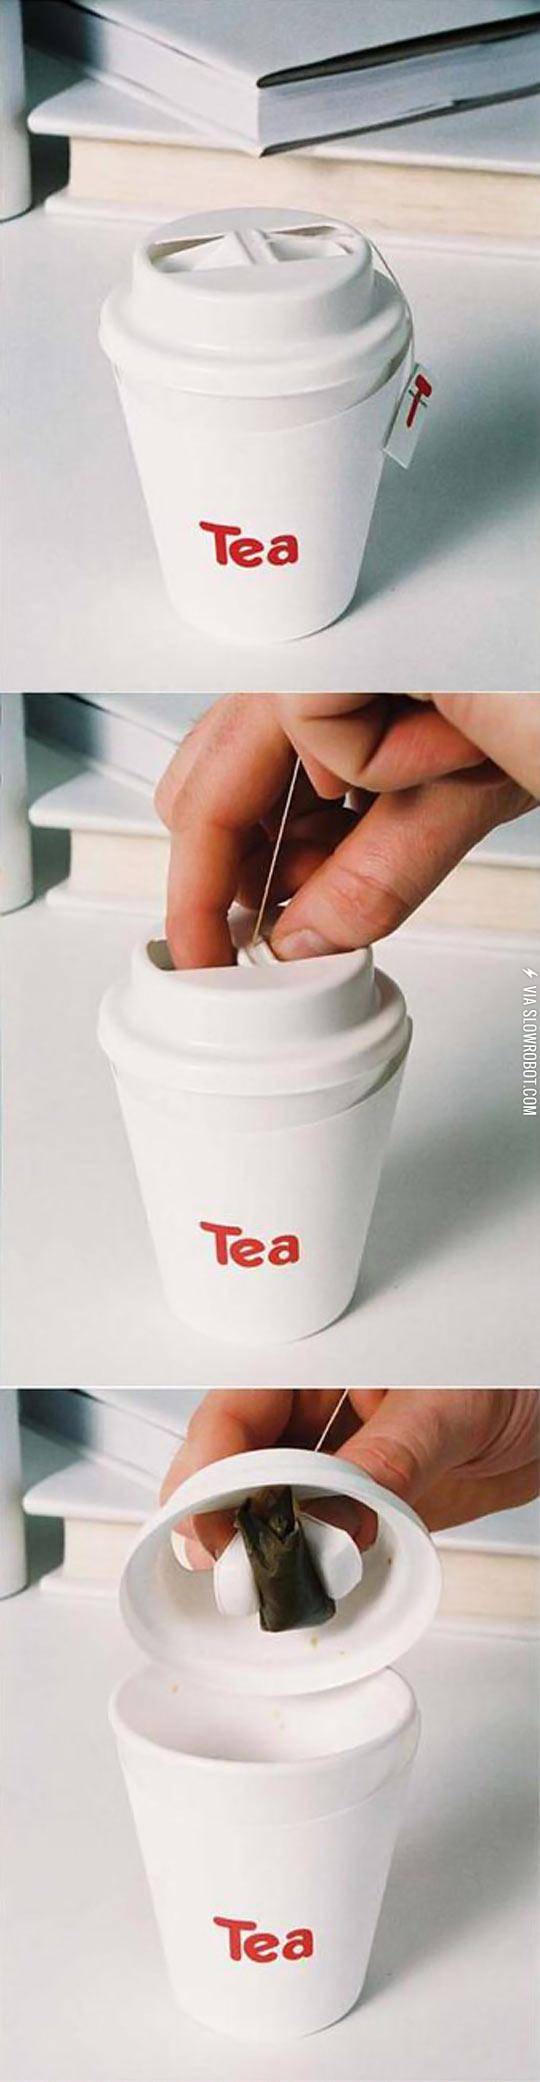 This+Cup+Design+Is+Really+Clever